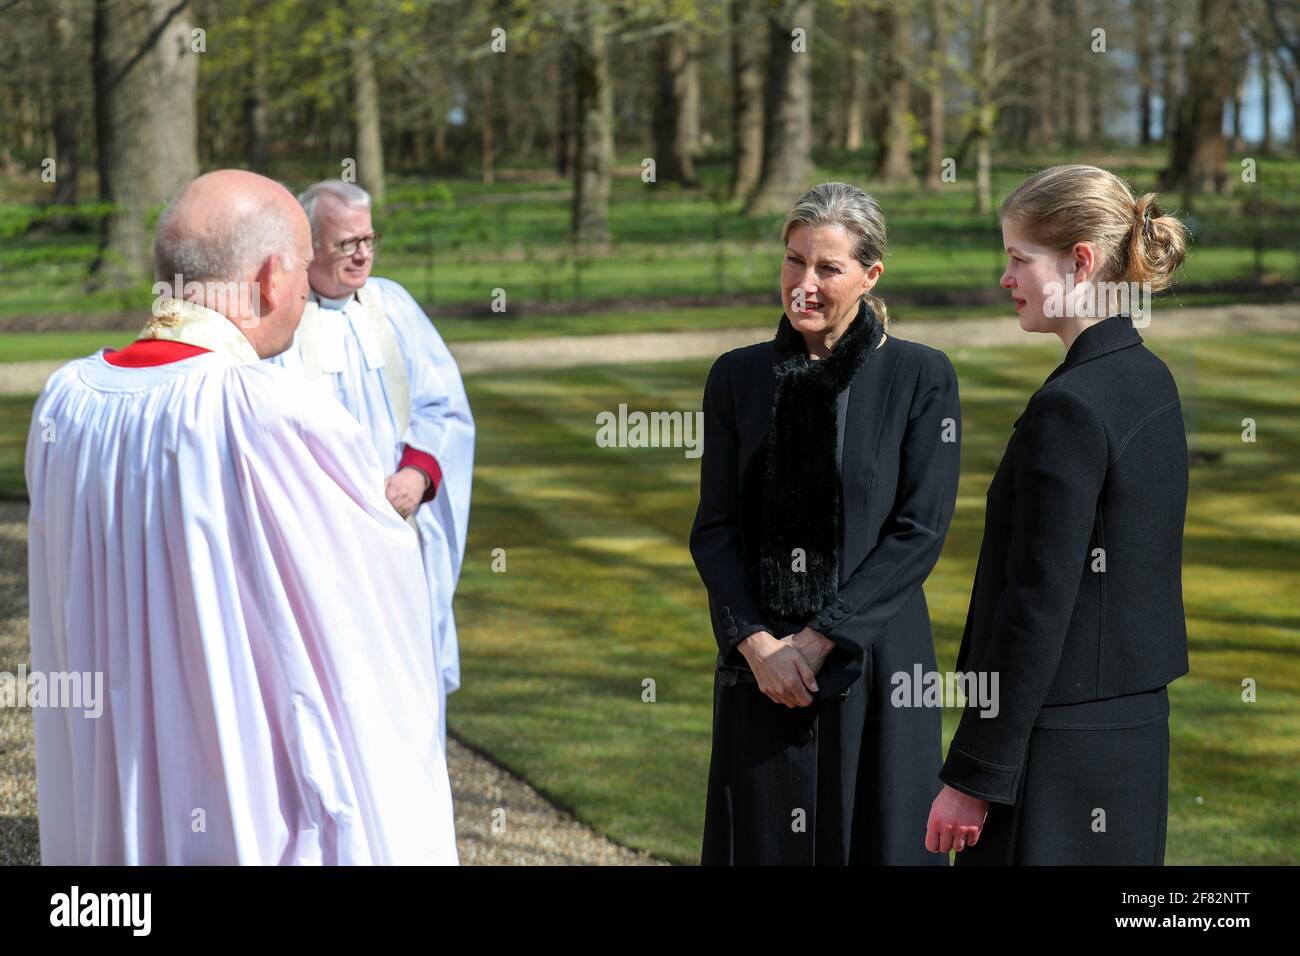 The Countess of Wessex, with her daughter Lady Louise Windsor, talks to Cannon Martin Poll, Domestic Chaplin to Her Majesty The Queen, as they attend the Sunday service at the Royal Chapel of All Saints, Windsor, following the announcement on Friday April 9, of the death of the Duke of Edinburgh at the age of 99. Picture date: Sunday April 11, 2021. Stock Photo